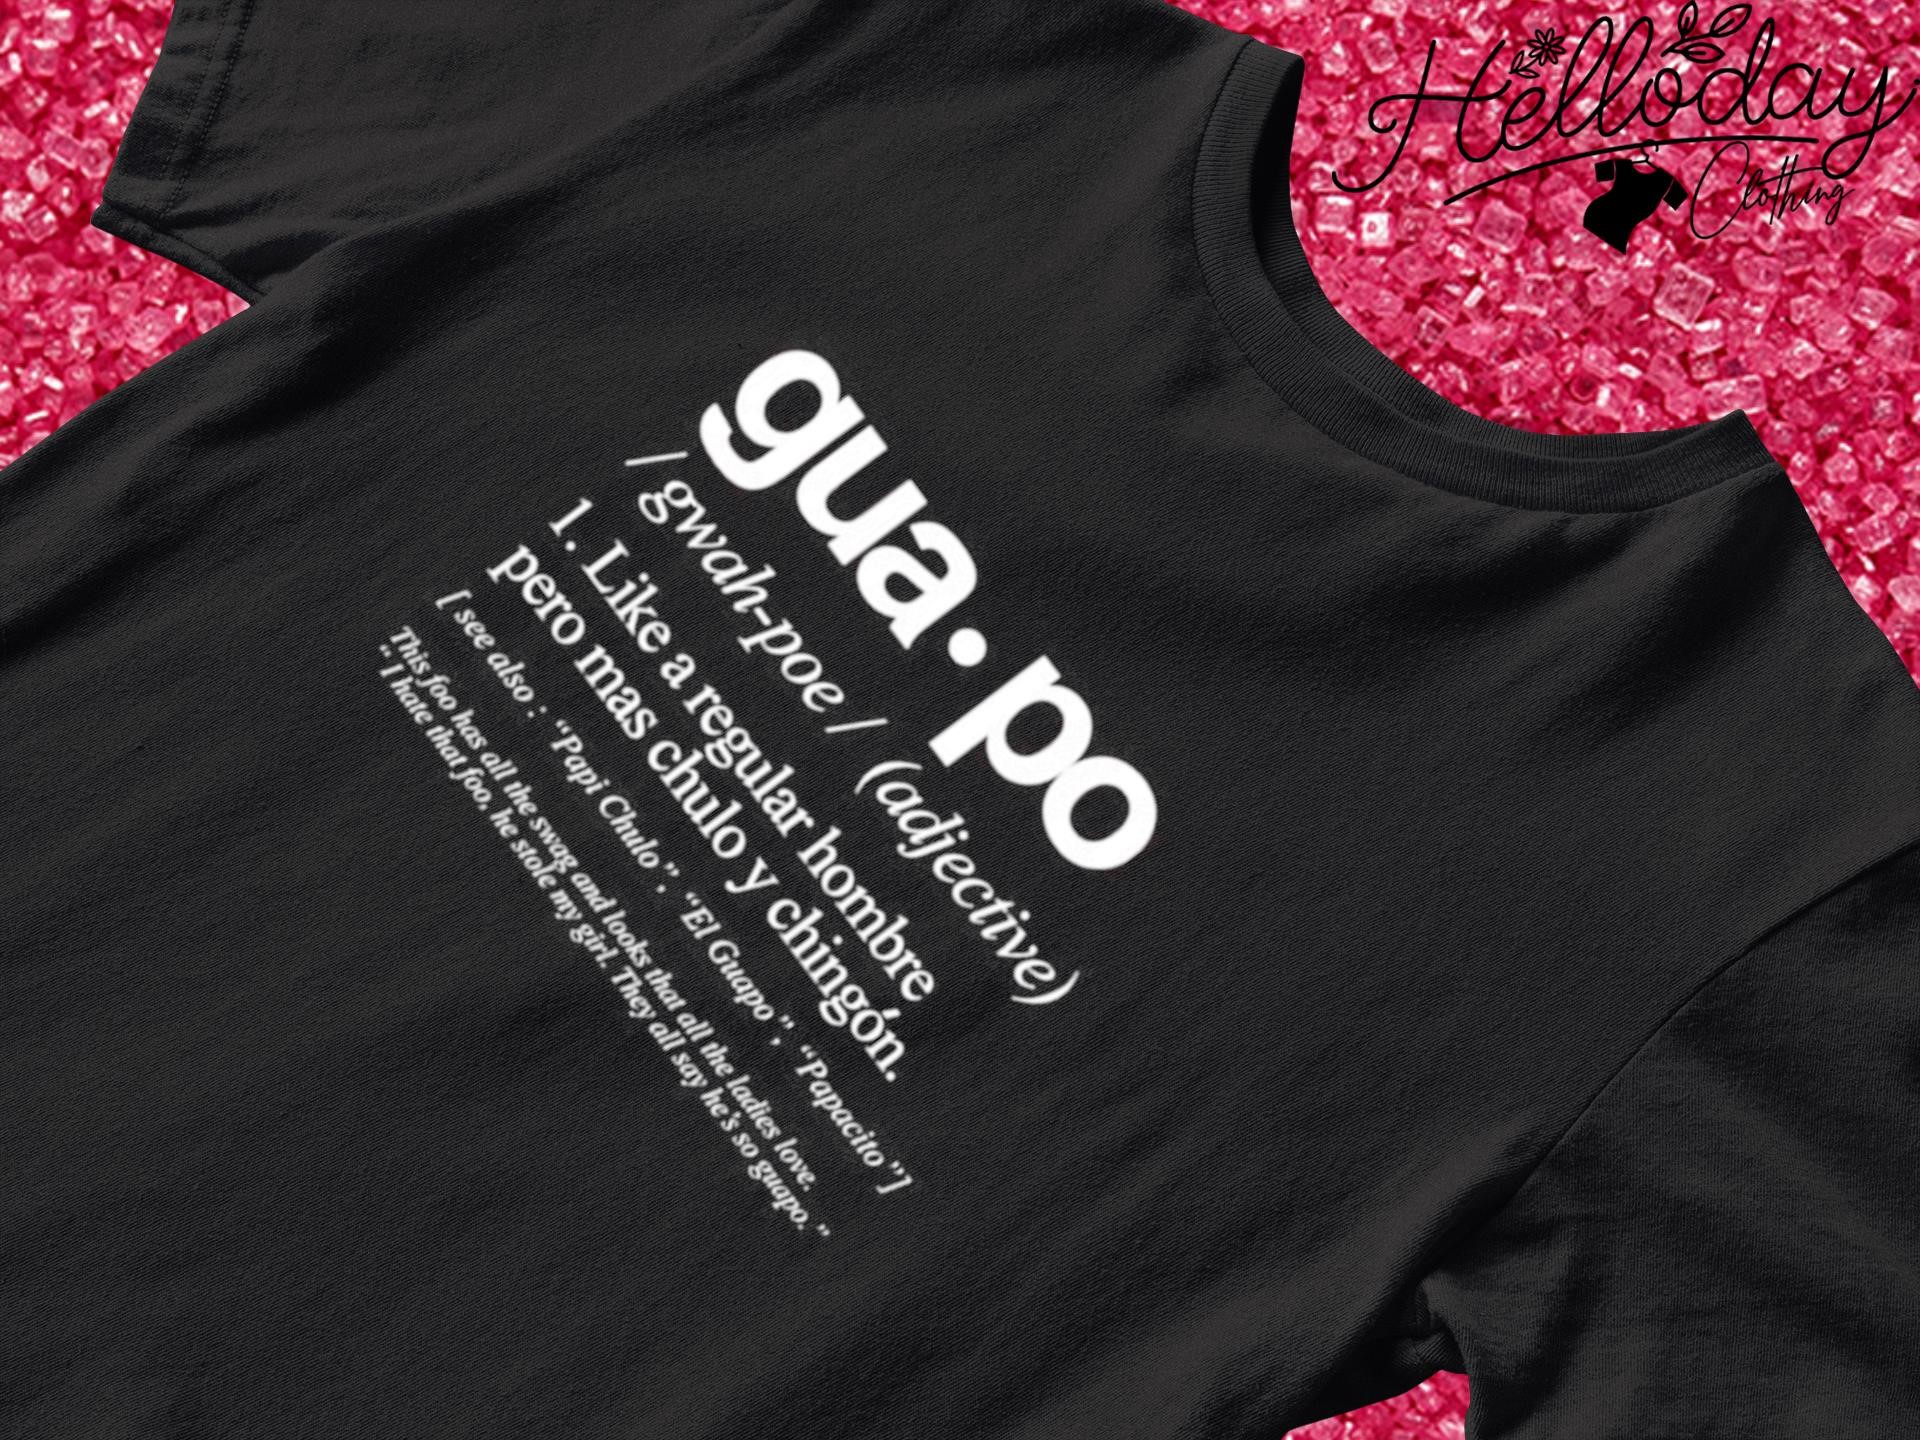 The definition of guapo old school shirt